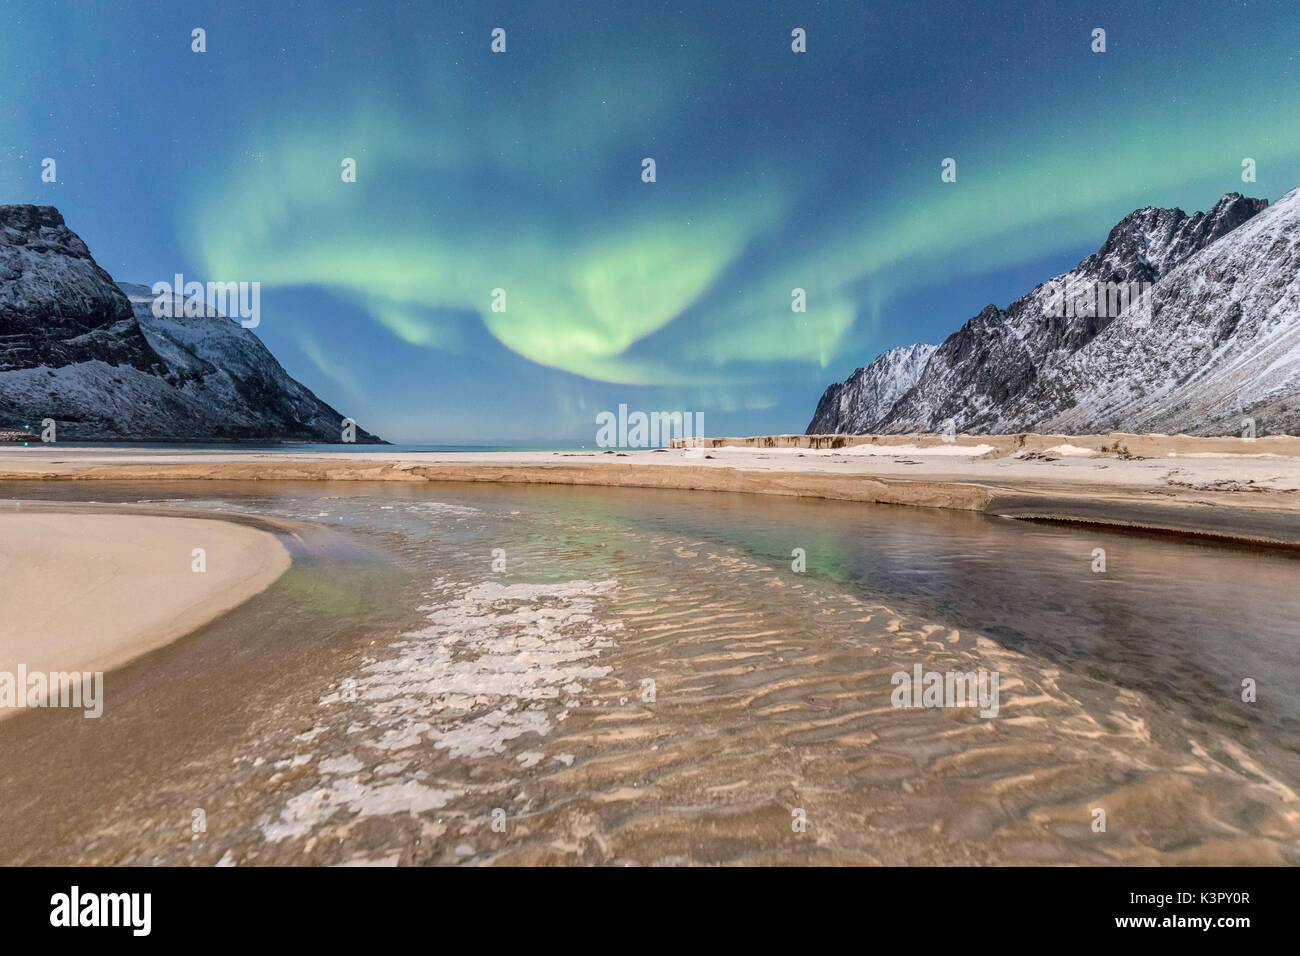 Green lights of Aurora Borealis reflected in the cold sea surrounded by snowy peaks Ersfjord Senja Tromsø Norway Europe Stock Photo